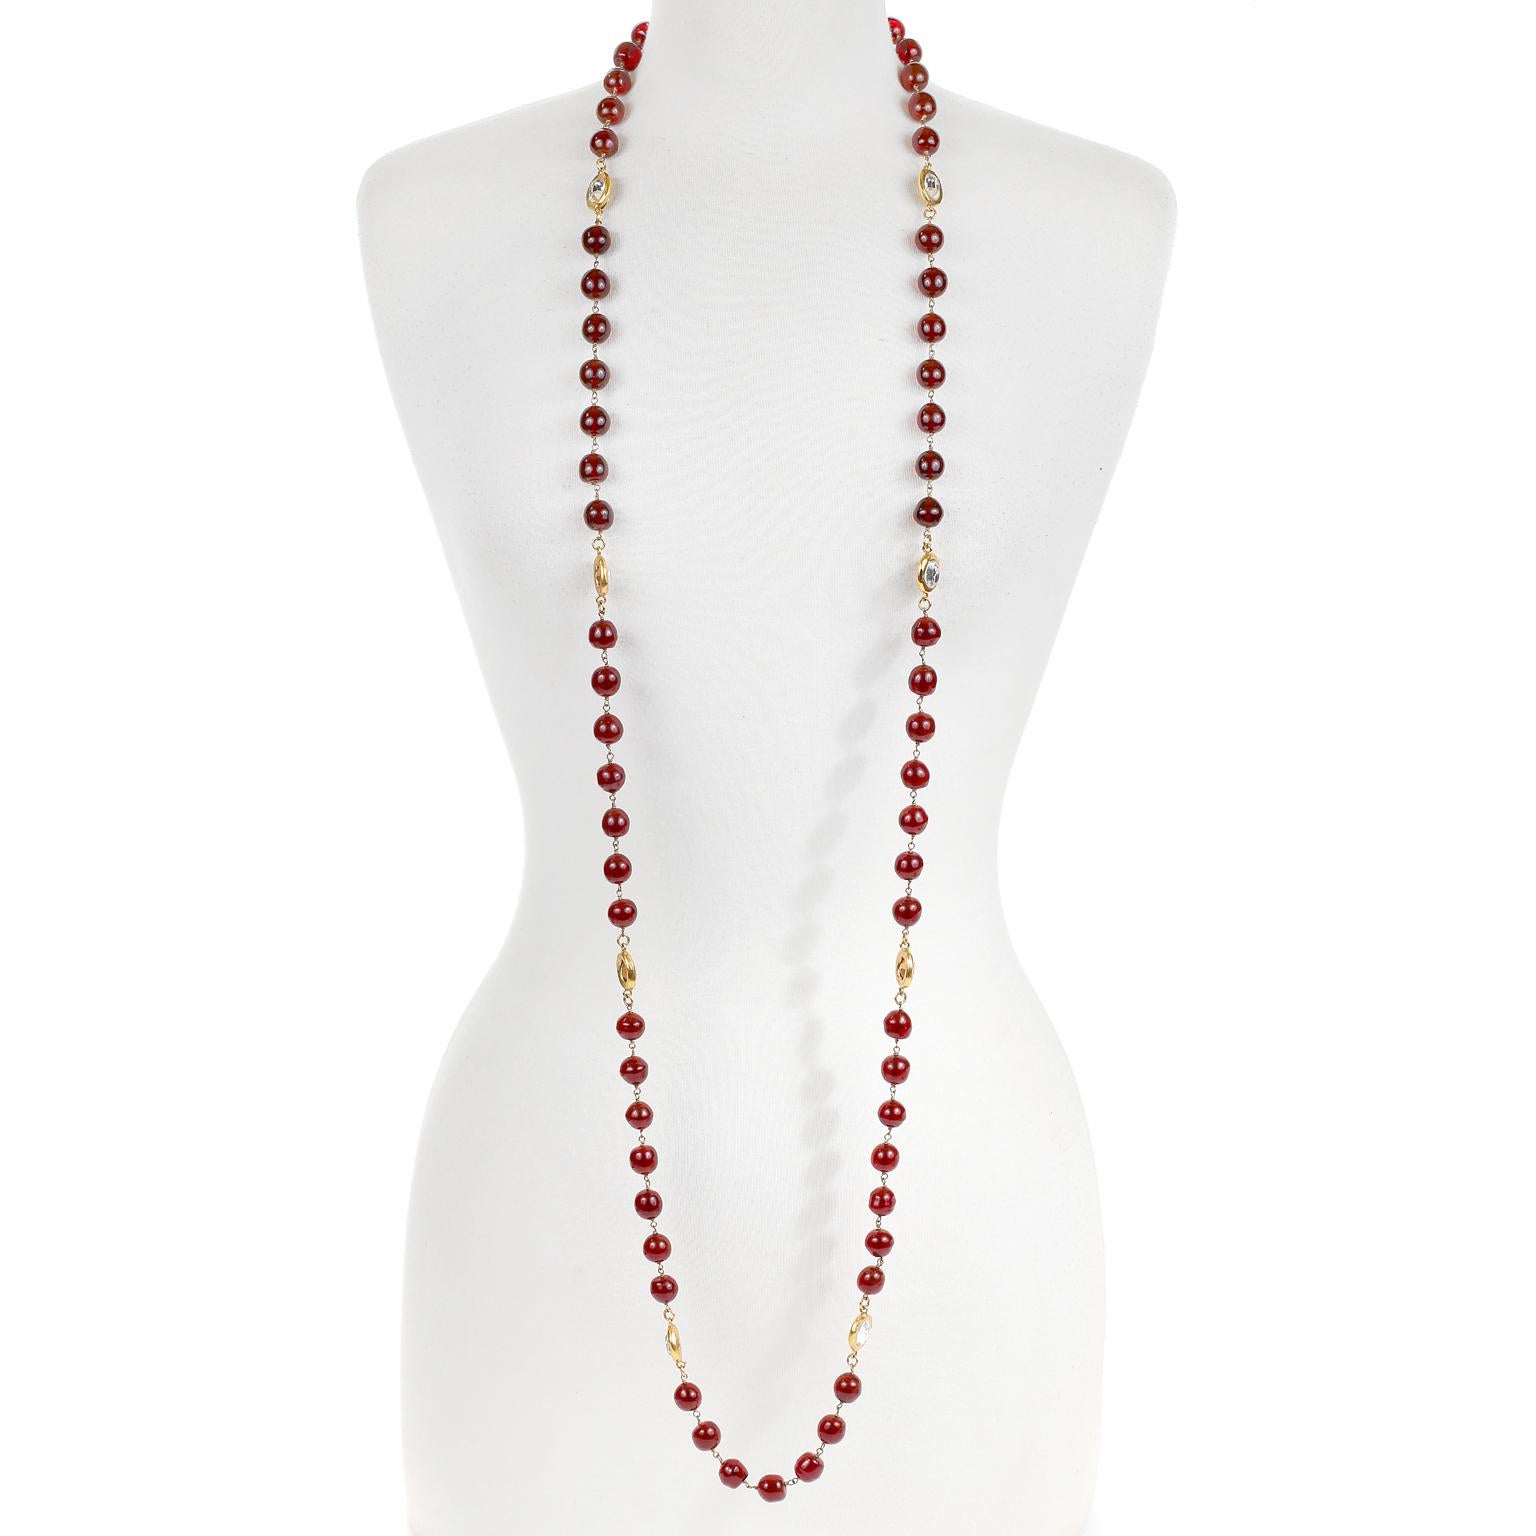 This authentic Chanel Red Gripoix and Crystal Necklace is in excellent vintage condition.  Large red Gripoix glass stones have rose cut crystals stations.  Gold tone metal.    Measures 60 inches.  Can be worn single or double.  Spring hook clasp.